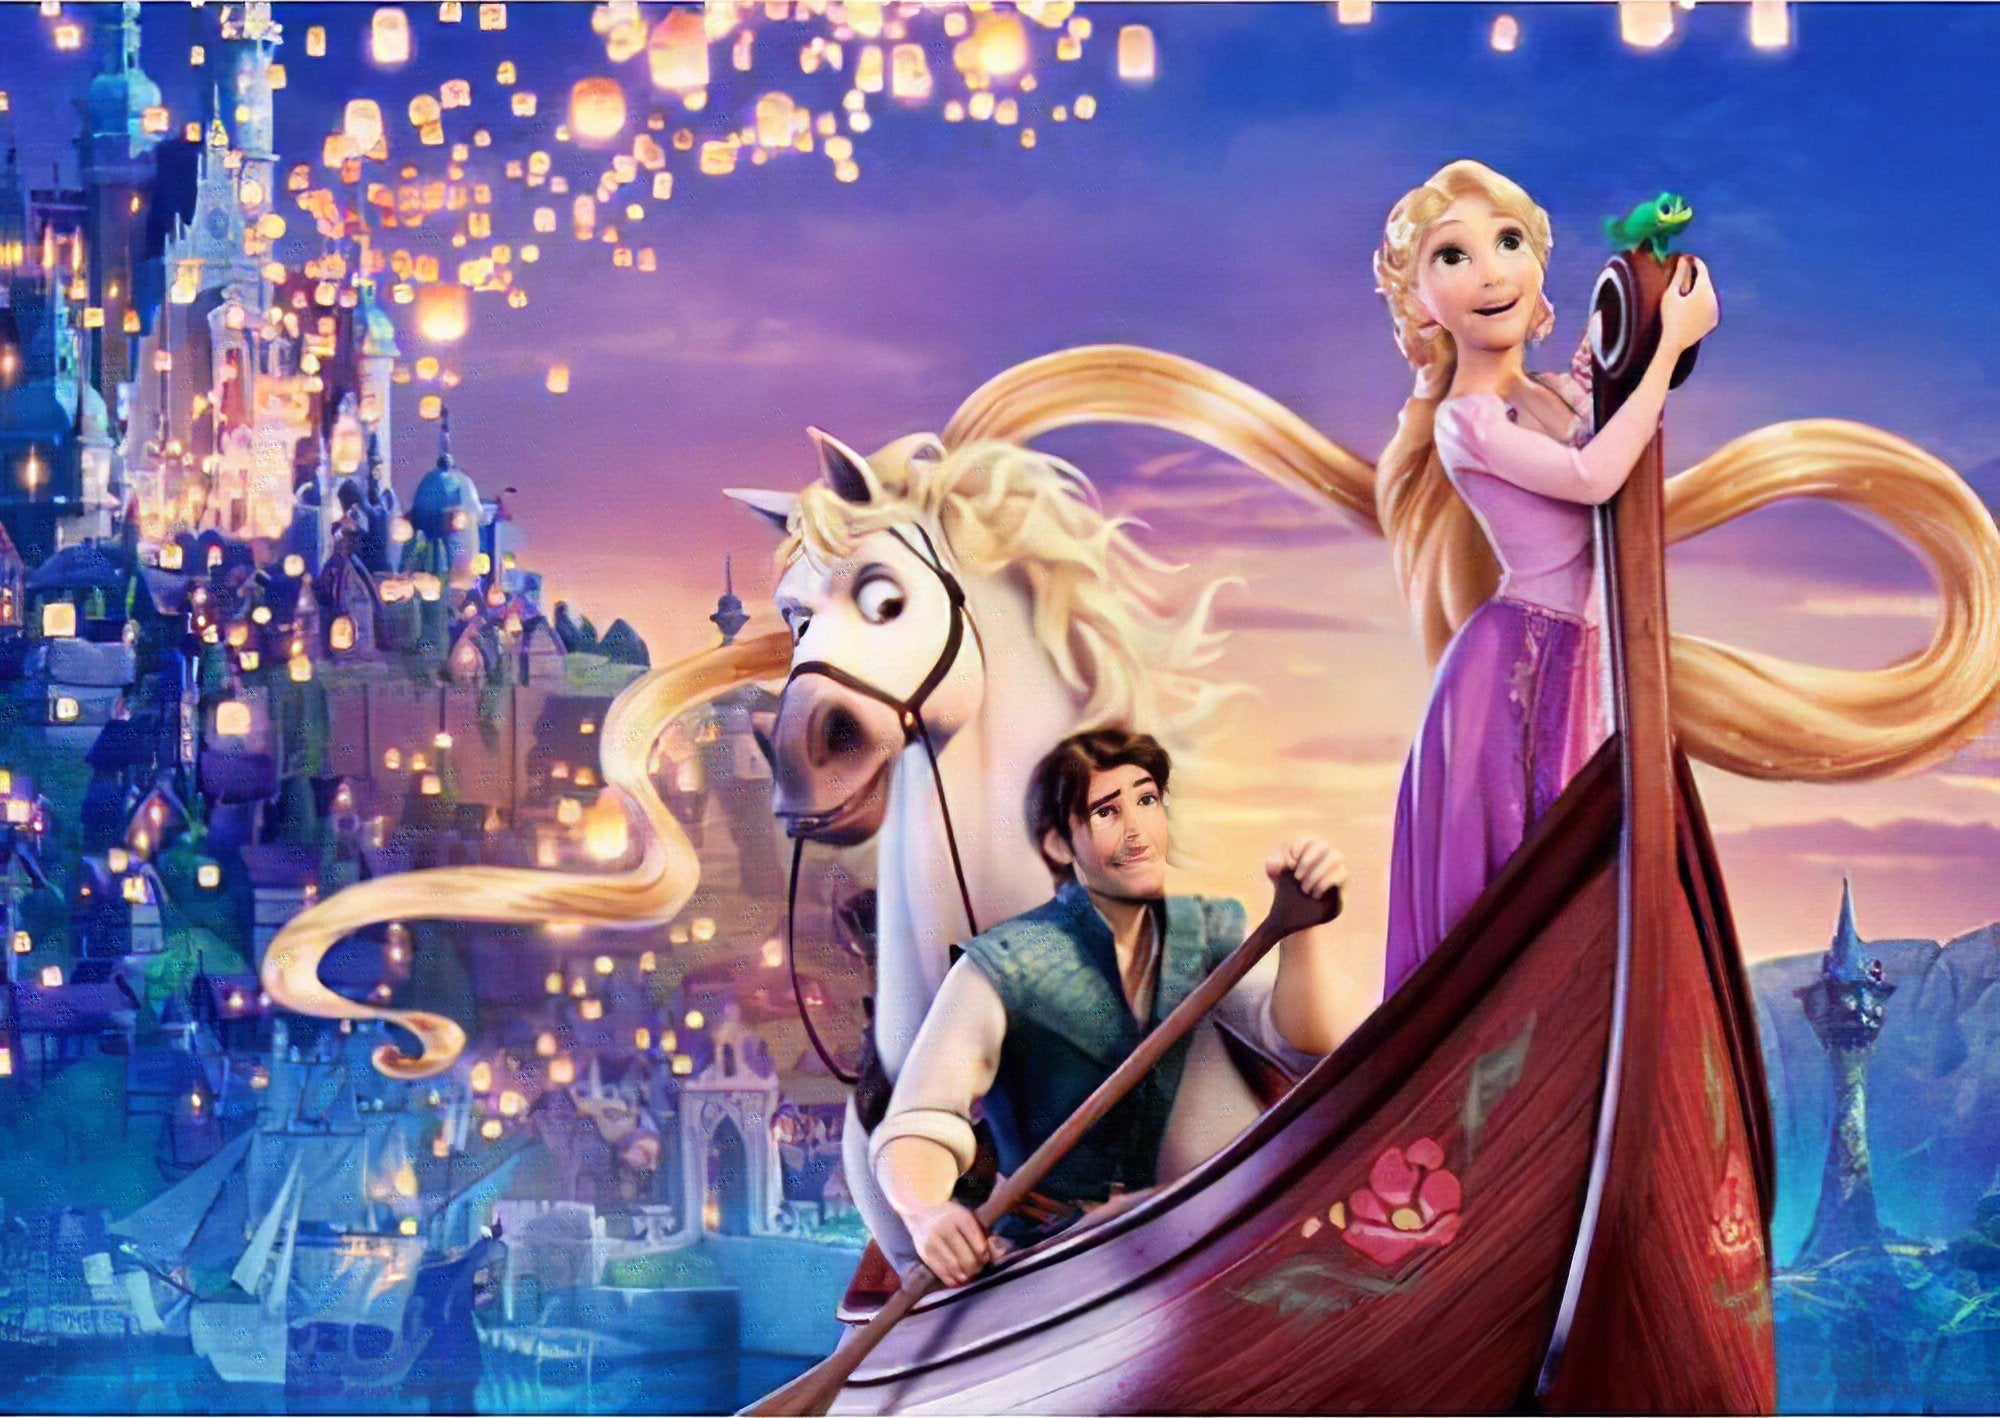 Relive a magical moment with Flynn and Rapunzel on a boat.Horse, Flynn And Rapunzel In Boat - Diamondartlove